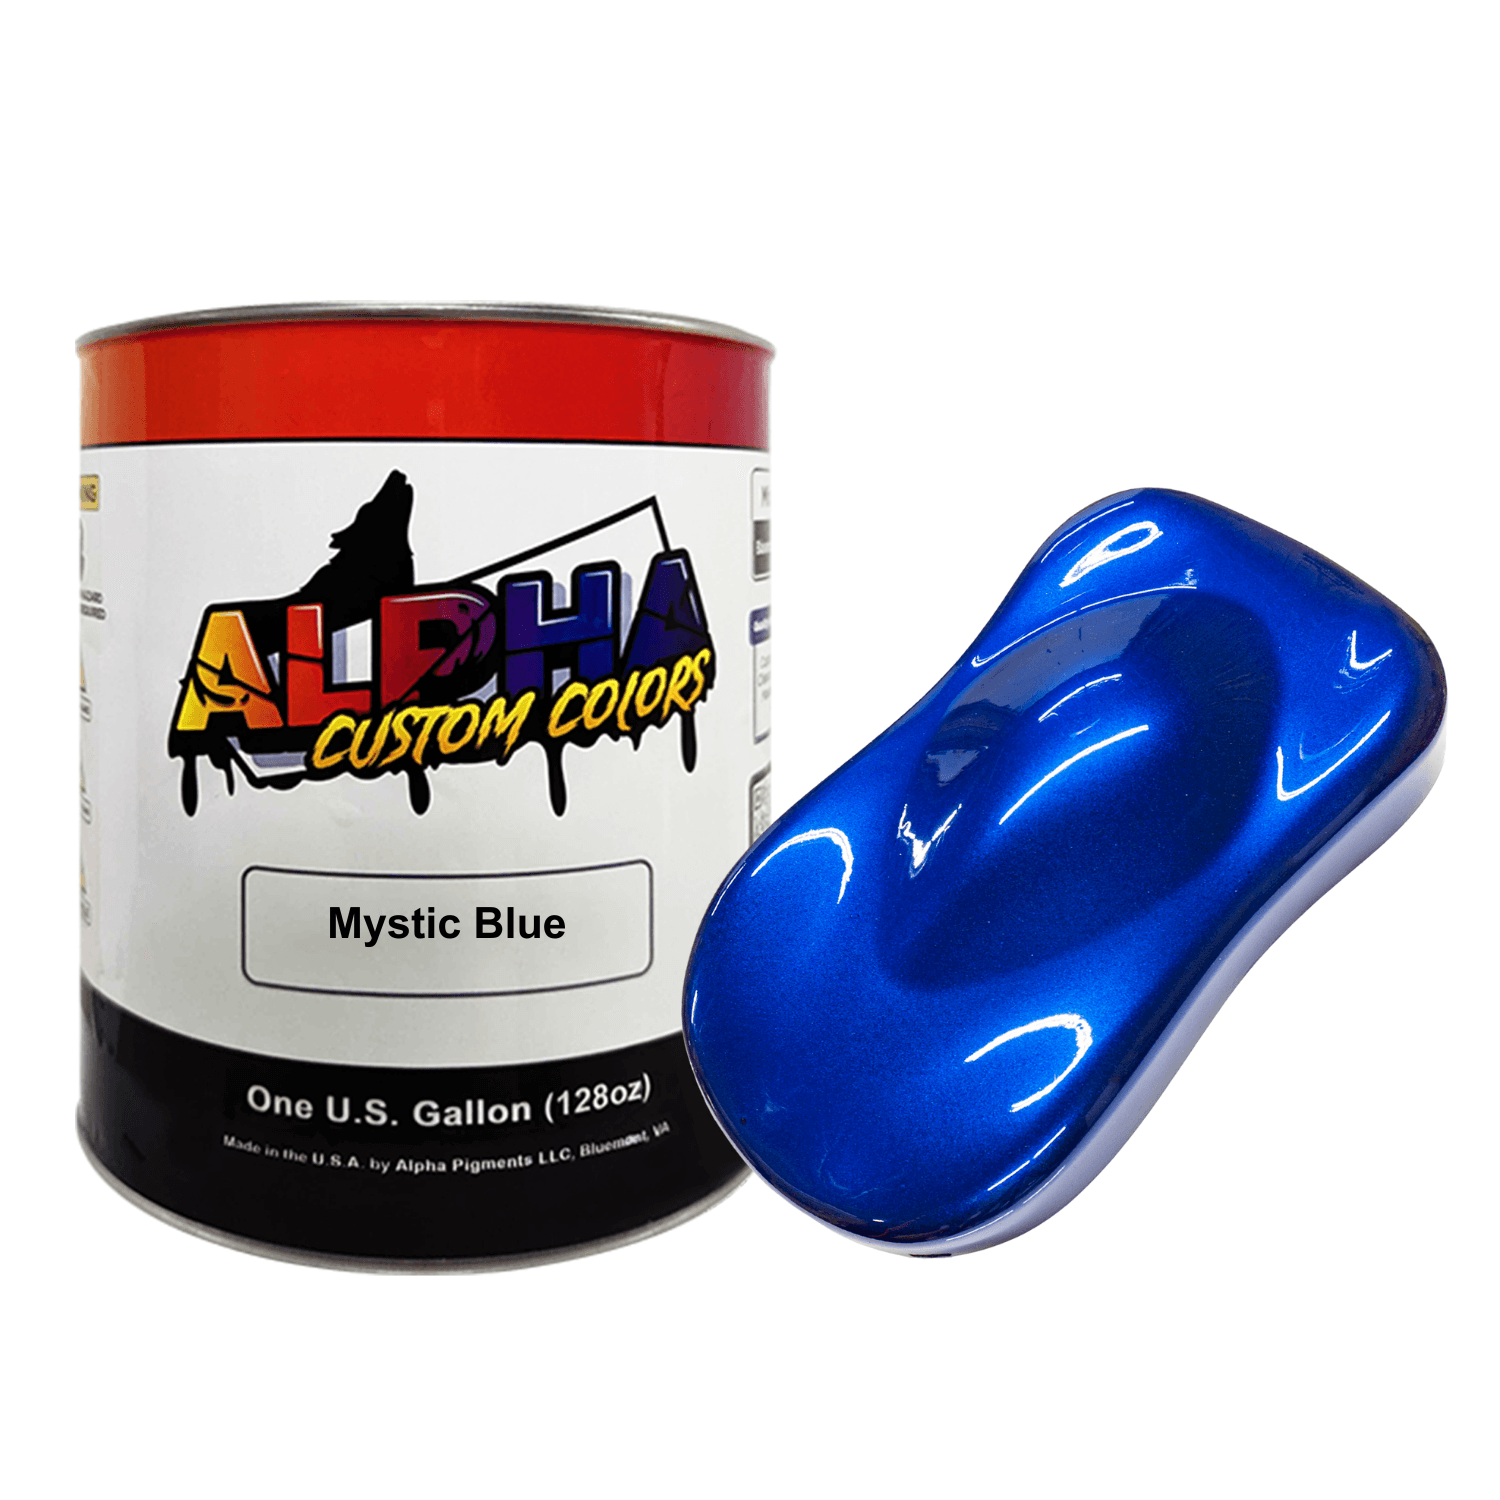 Alside Mystic Blue (Vinyl) Precisely Matched For Spray Paint and